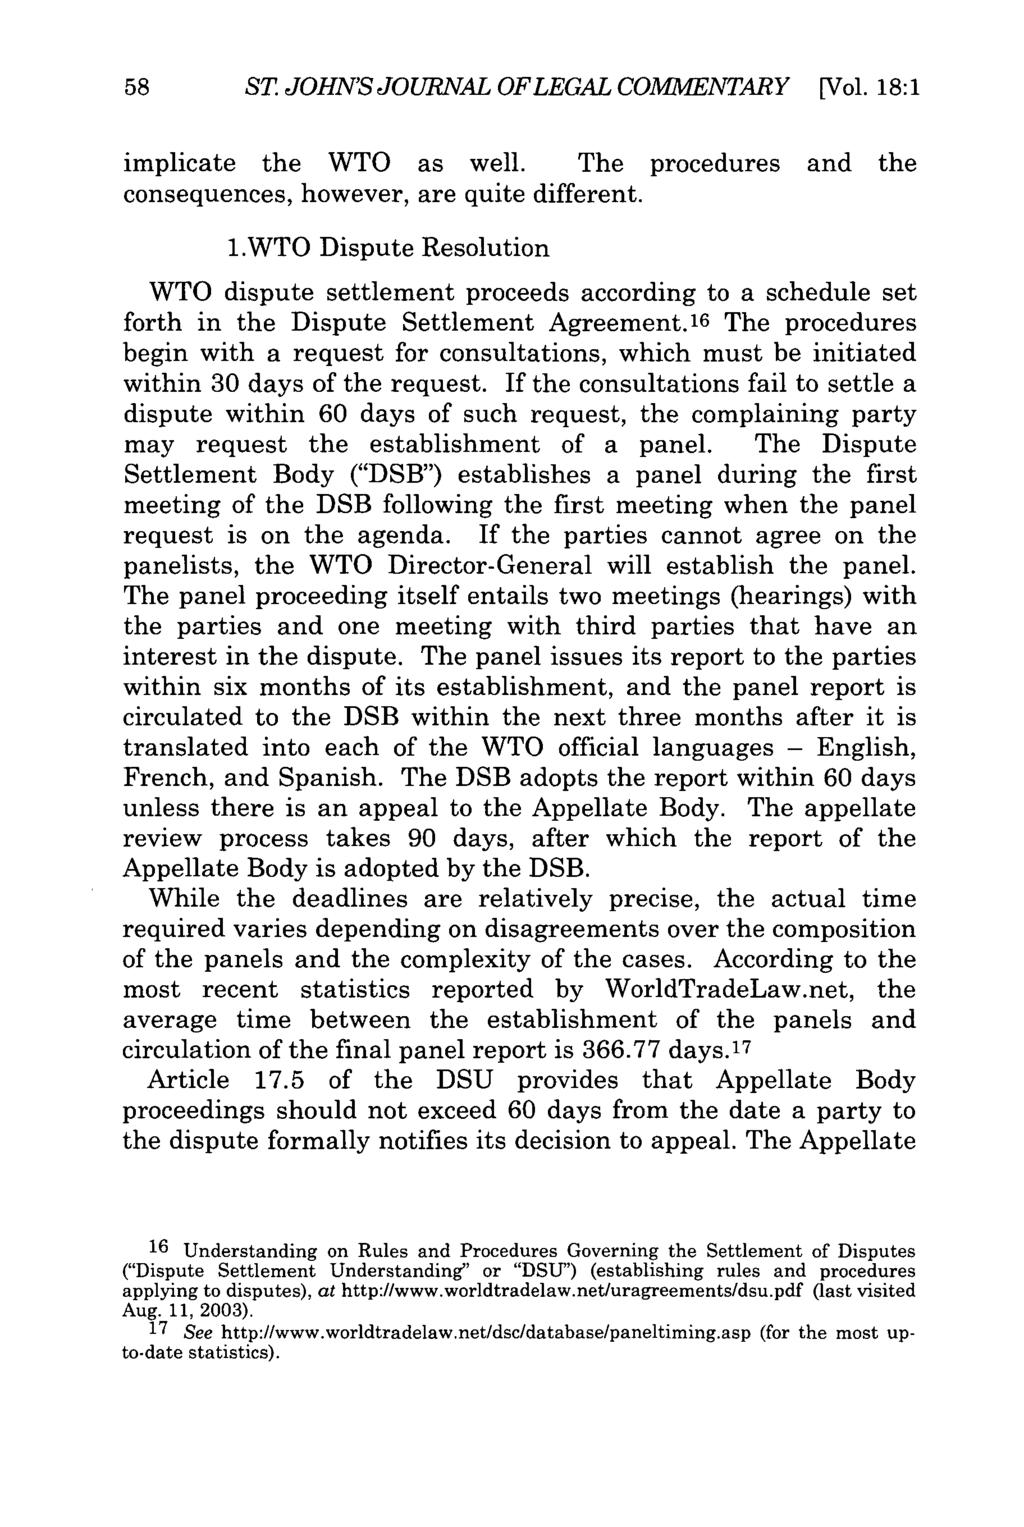 58 ST JOHN'S JOURNAL OFLEGAL COMMENTARY [Vol. 18:1 implicate the WTO as well. The procedures and the consequences, however, are quite different. 1.WTO Dispute Resolution WTO dispute settlement proceeds according to a schedule set forth in the Dispute Settlement Agreement.